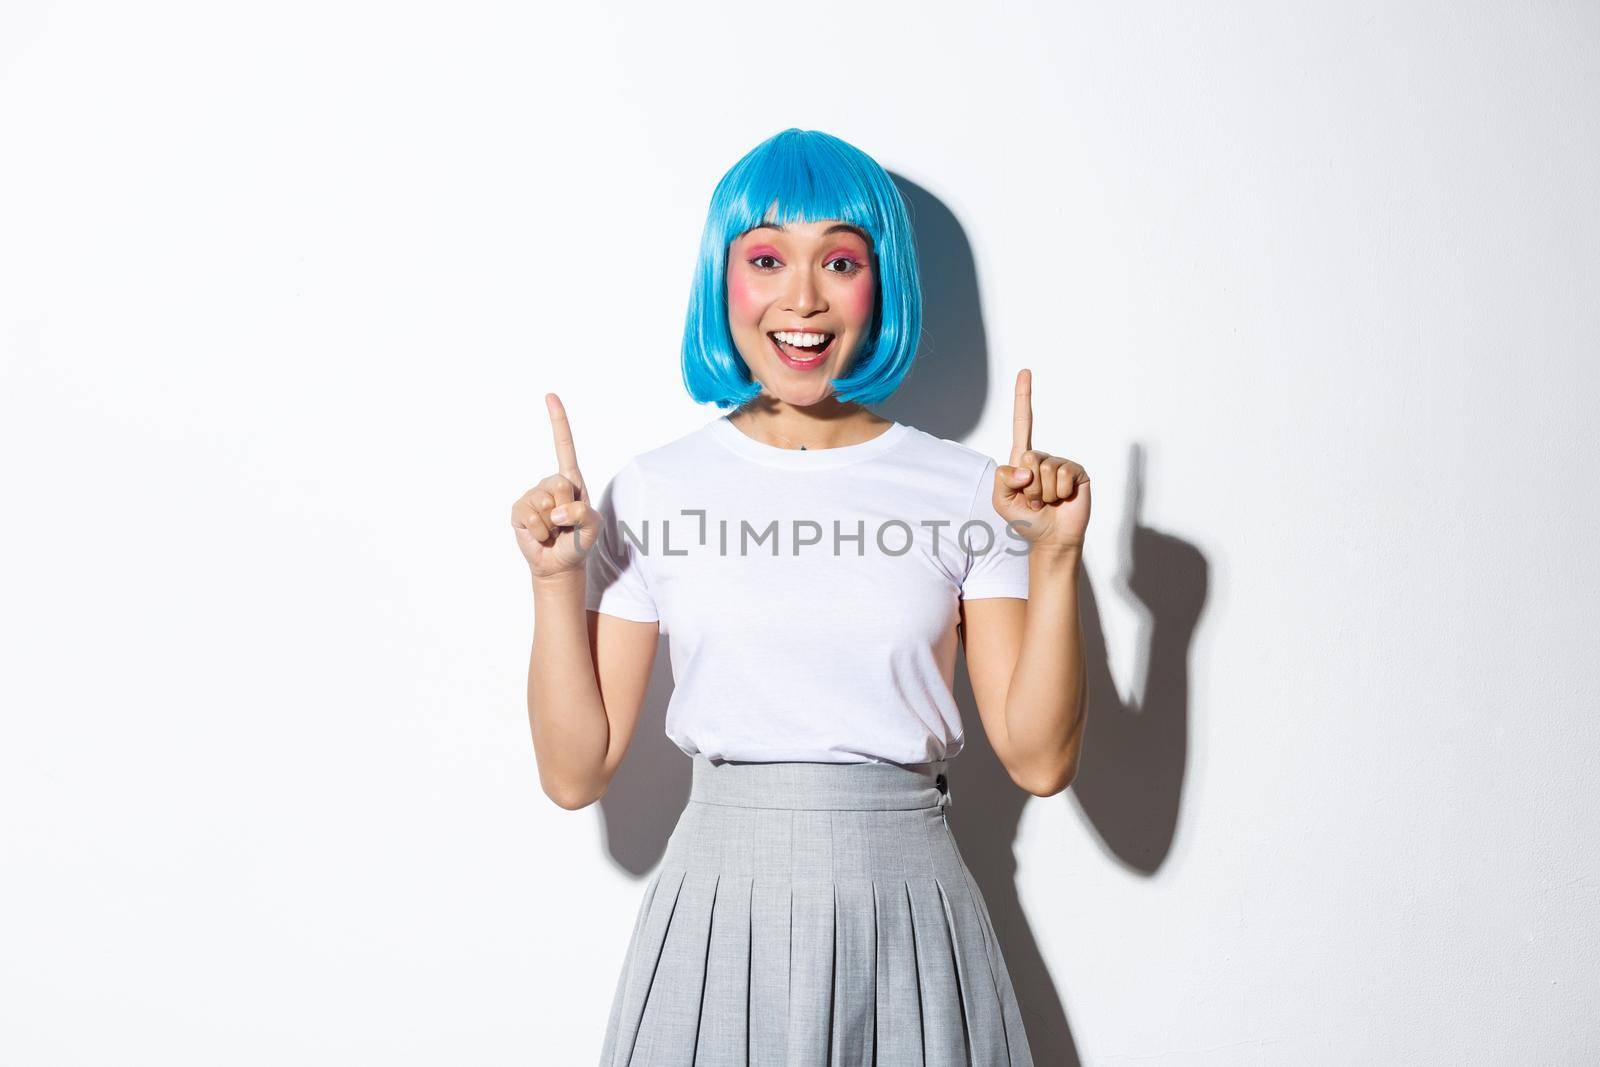 Joyful good-looking asian girl in blue wig, celebrating holiday, dressed for party or halloween, pointing fingers up and smiling happy, standing over white background.